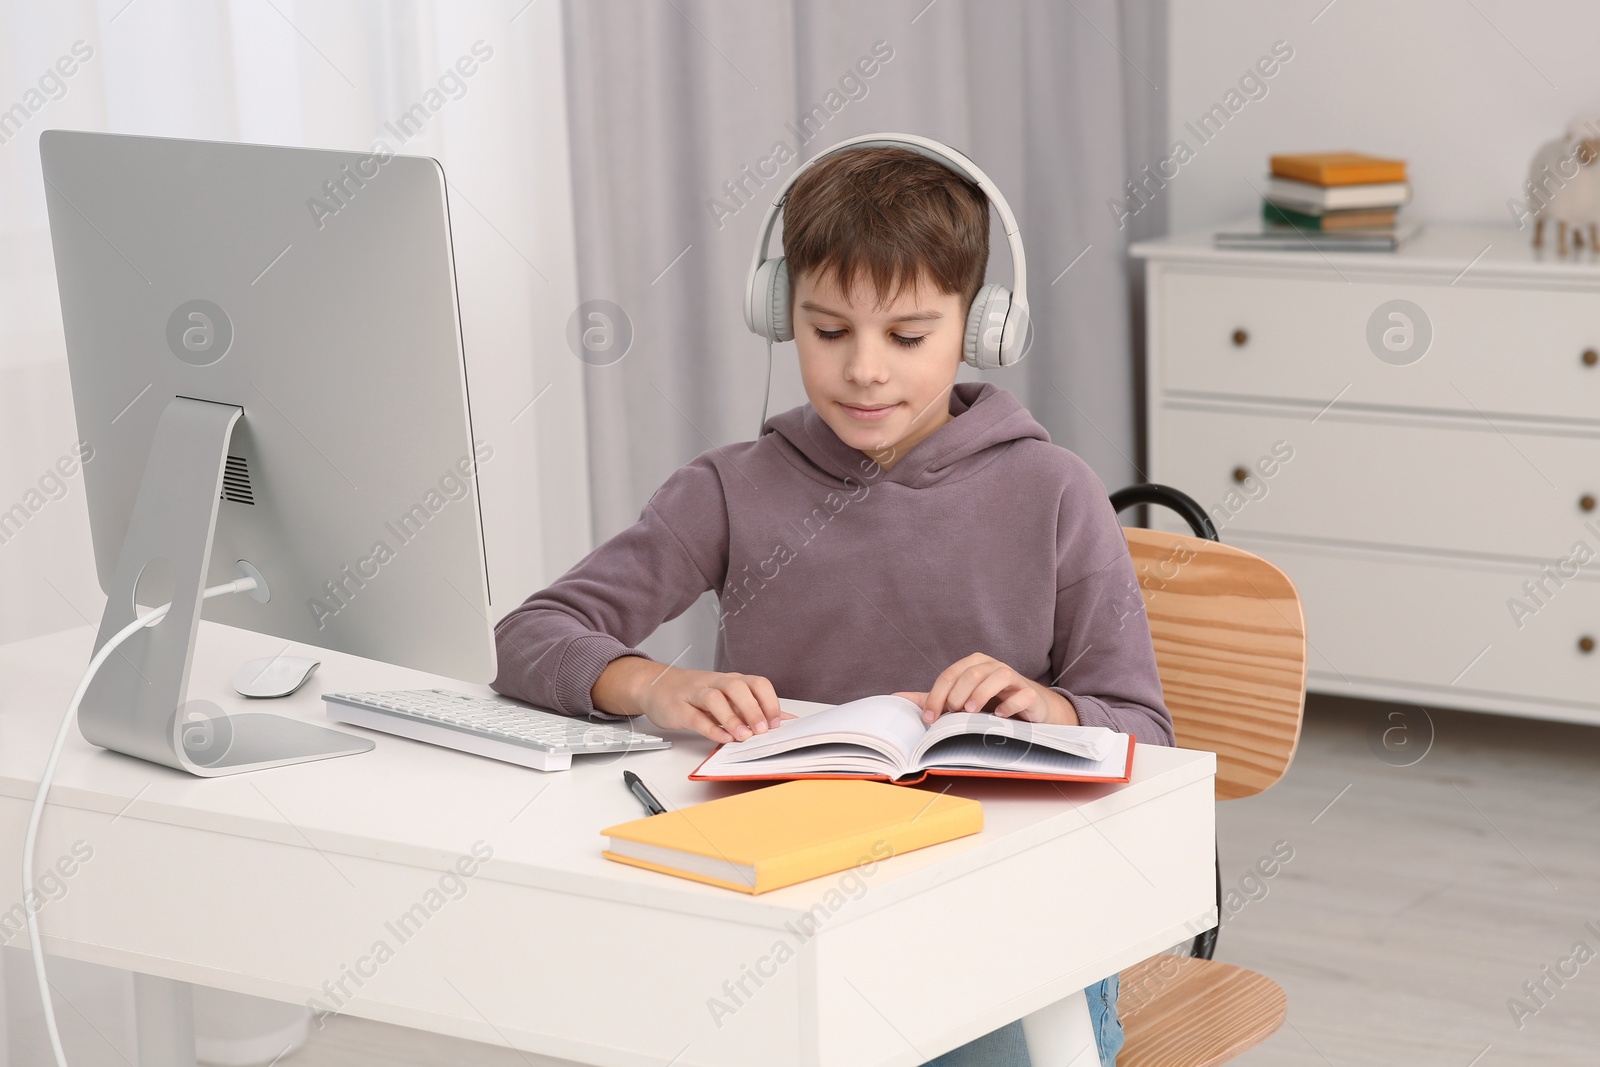 Photo of Boy reading book near computer at desk in room. Home workplace